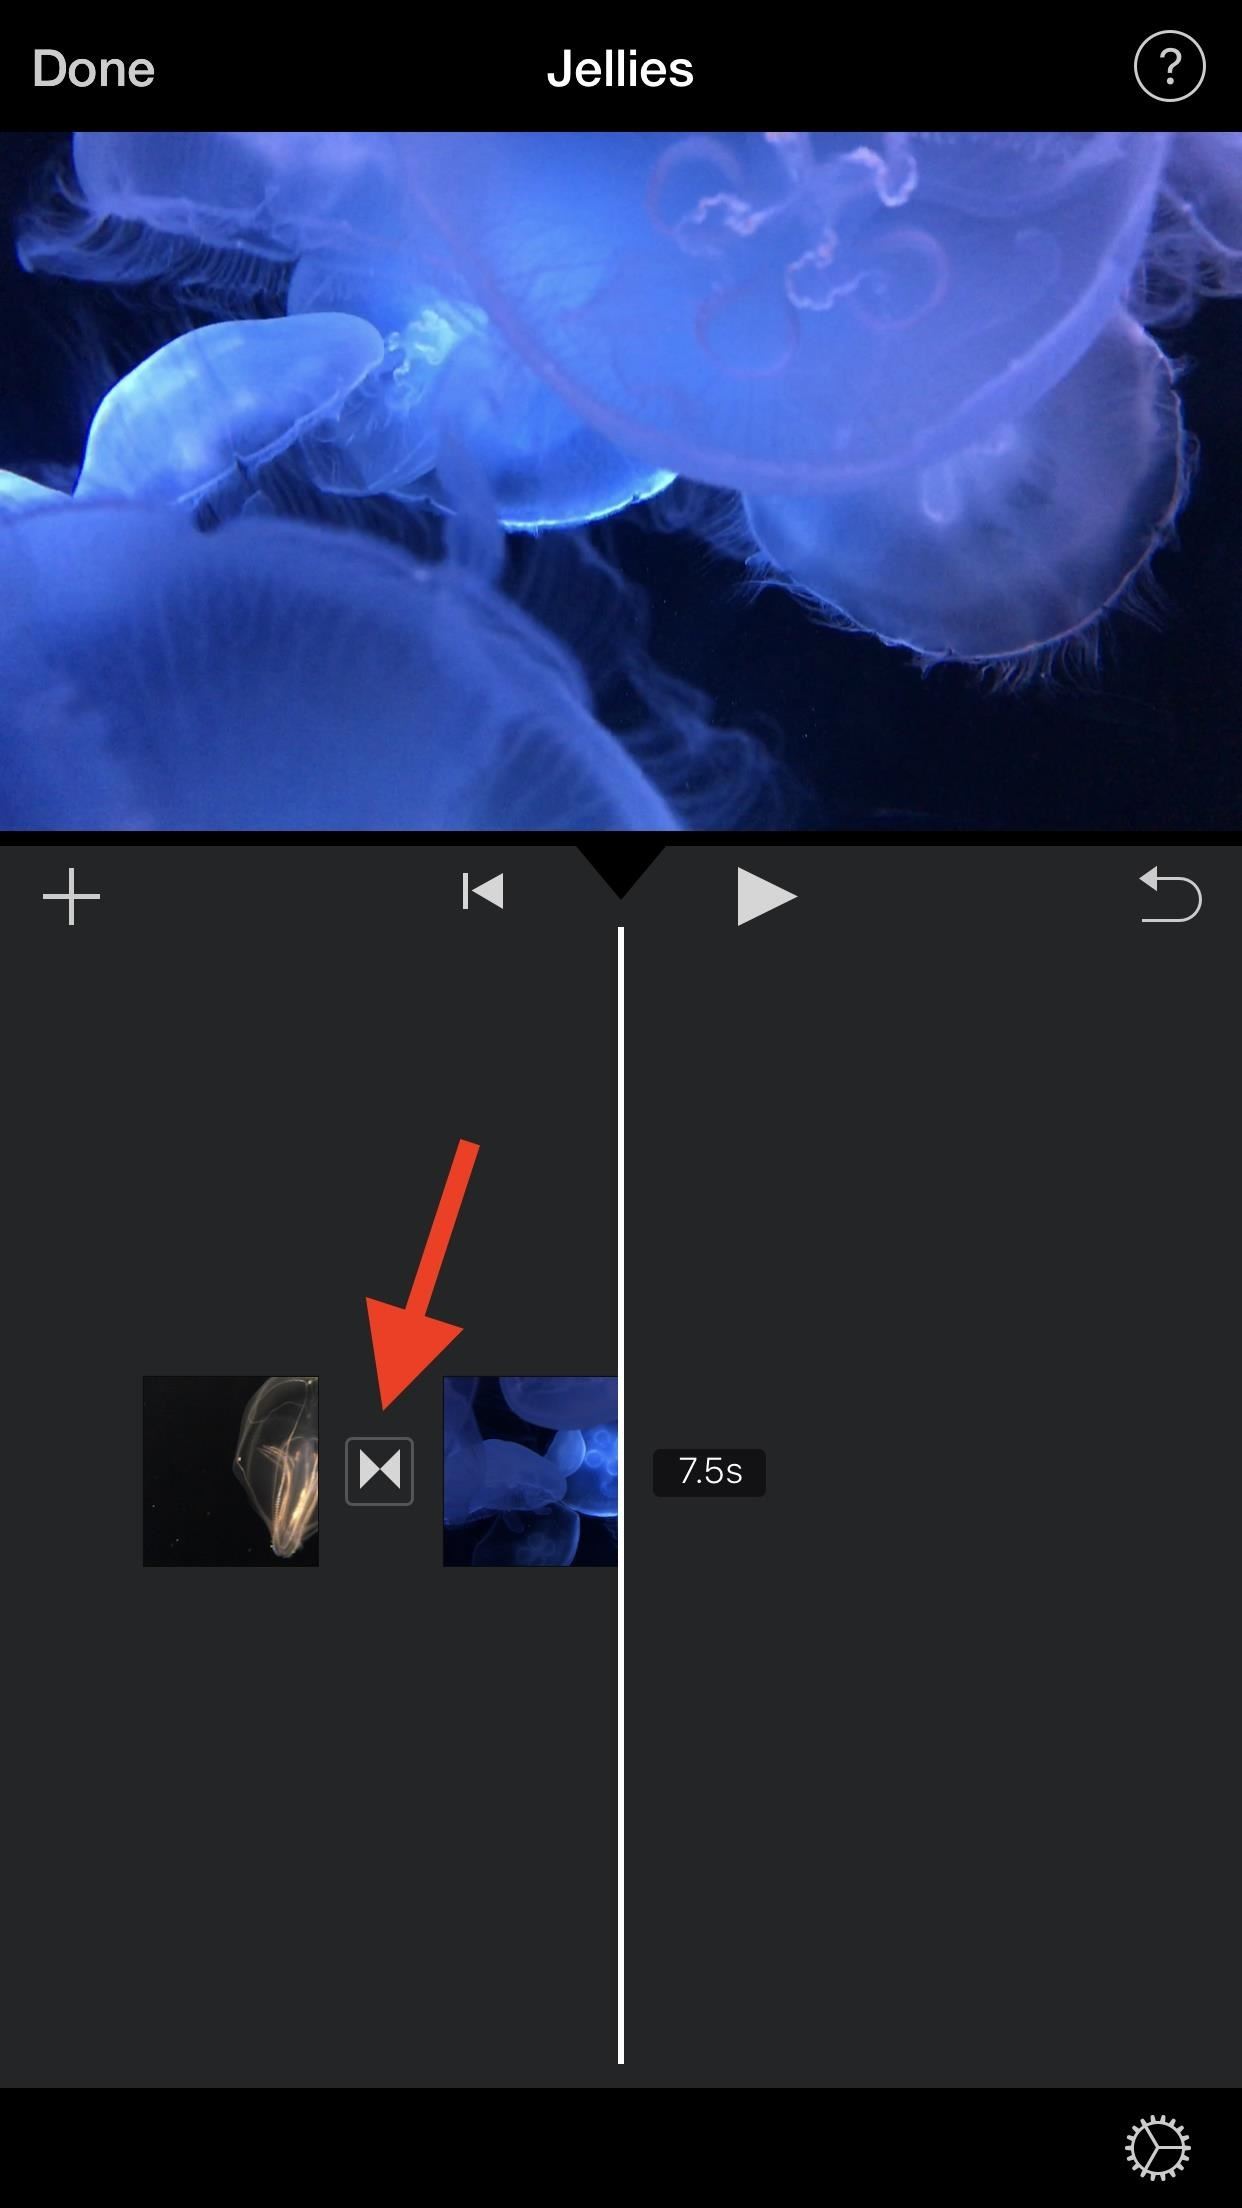 How to Add Fade-Ins, Fade-Outs & Fade-Through Transitions to iMovie Projects on Your iPhone